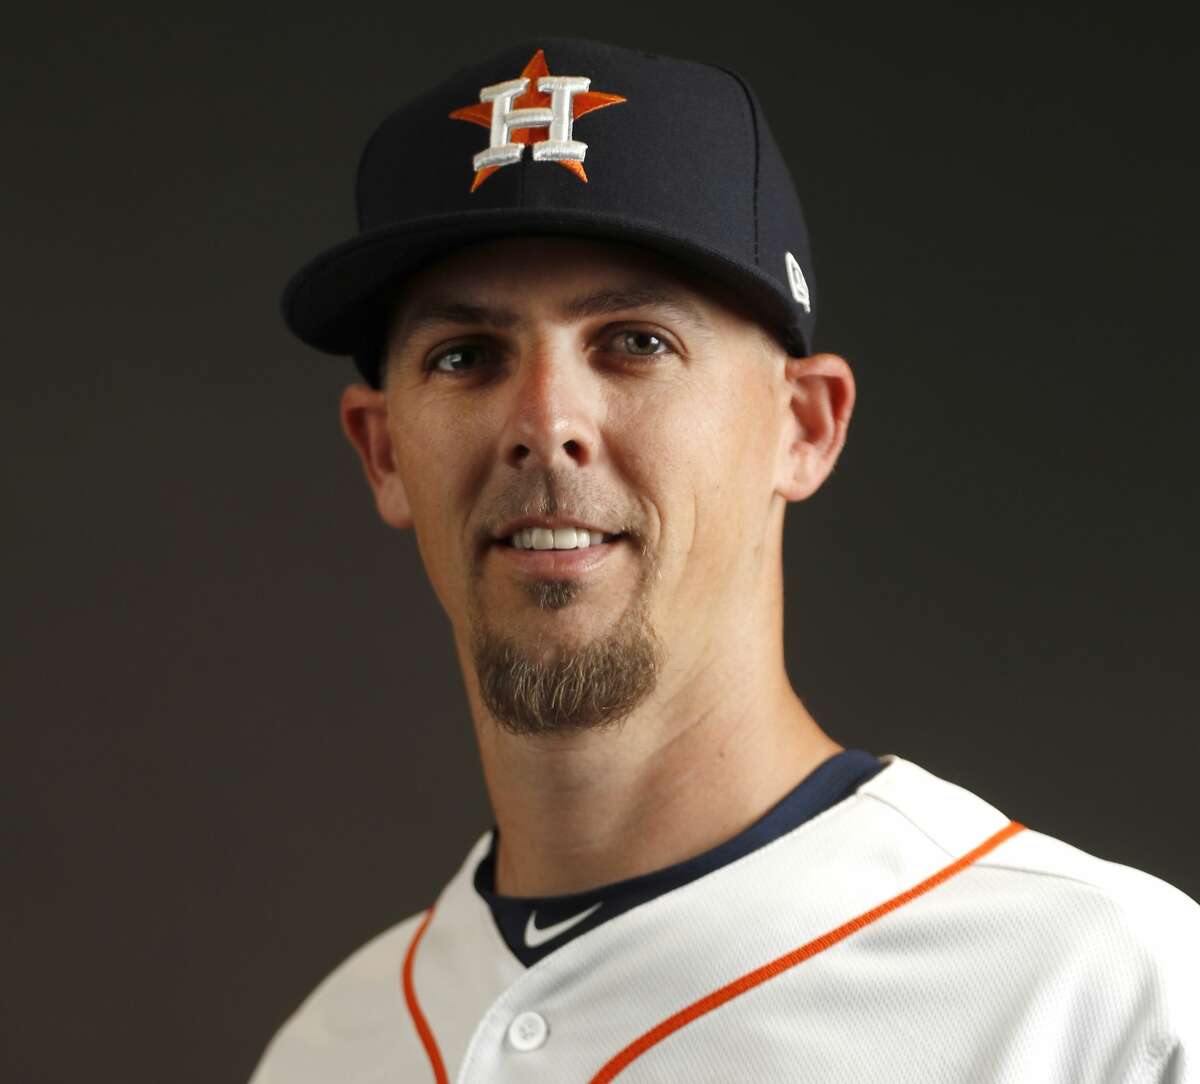 PHOTOS: Astros introduce new outfielder Michael Brantley  Mickey Storey, who managed the Class A Quad Cities club last season, was tabbed to guide Class AAA Round Rock in its first season back as an Astros affiliate. ( Karen Warren / Houston Chronicle ) >>>Browse through the photos for a look at the Astros' new outfielder in Michael Brantley ... 